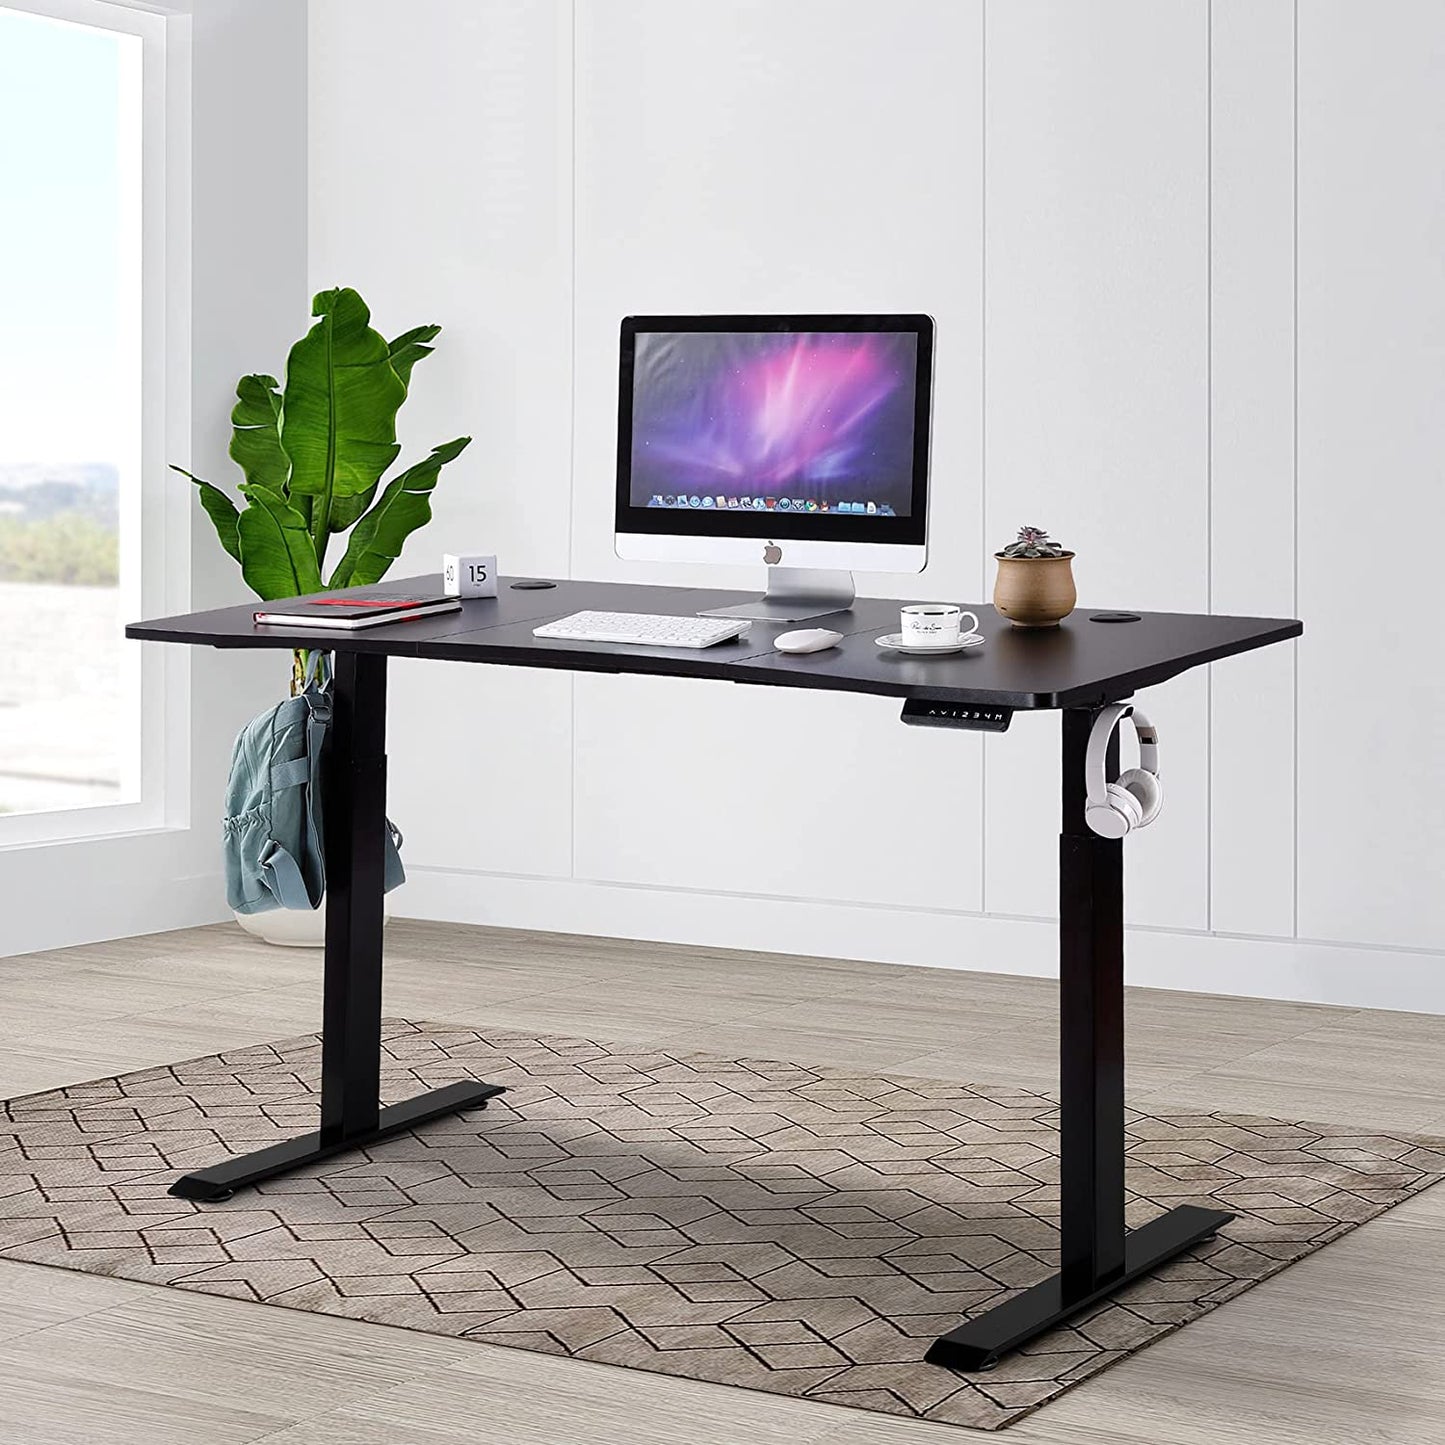 UNICOO - Dual Motor Electric Height Adjustable Standing Desk 59"x29.5" Inches, Home Office Computer Desk, Gaming Desk, with USB Charging and Hooks (XOT-D59)